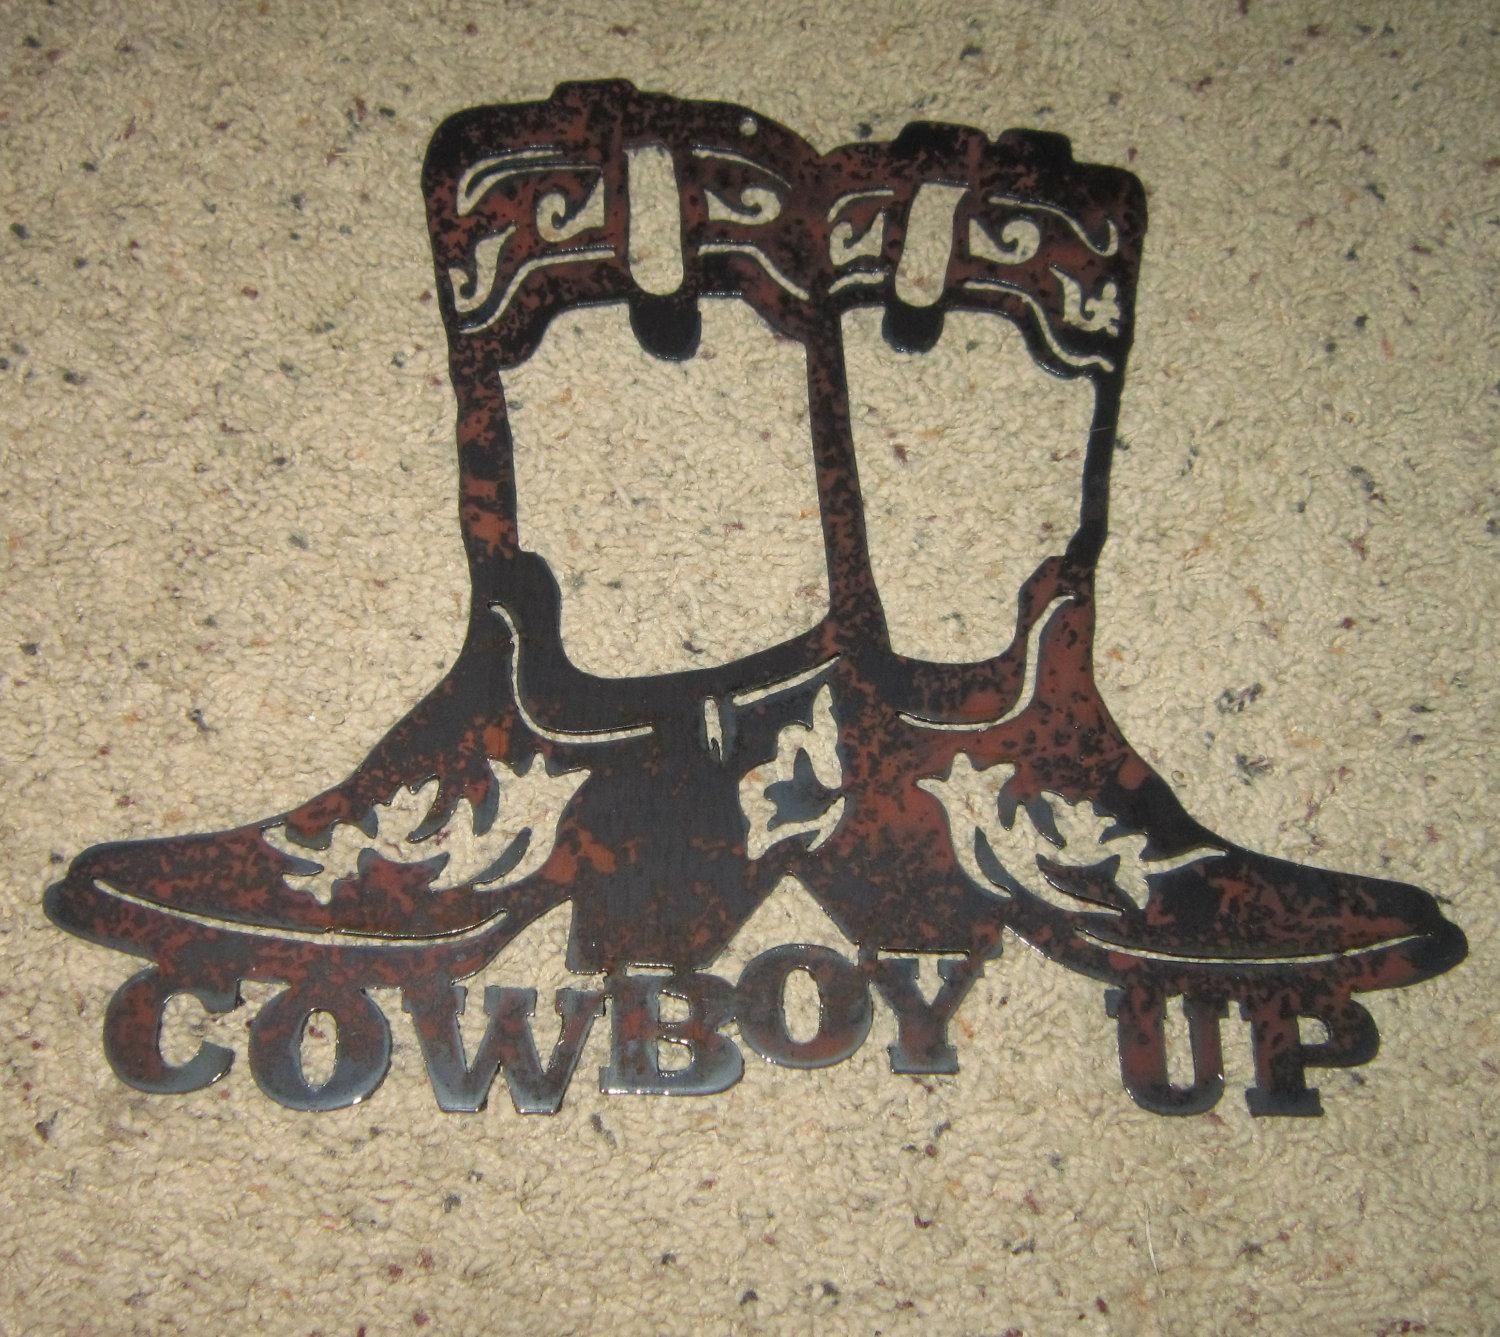 Cowboy Up Metal Art Cowboy Art Western Art Country Home With Regard To Country Metal Wall Art (View 1 of 20)